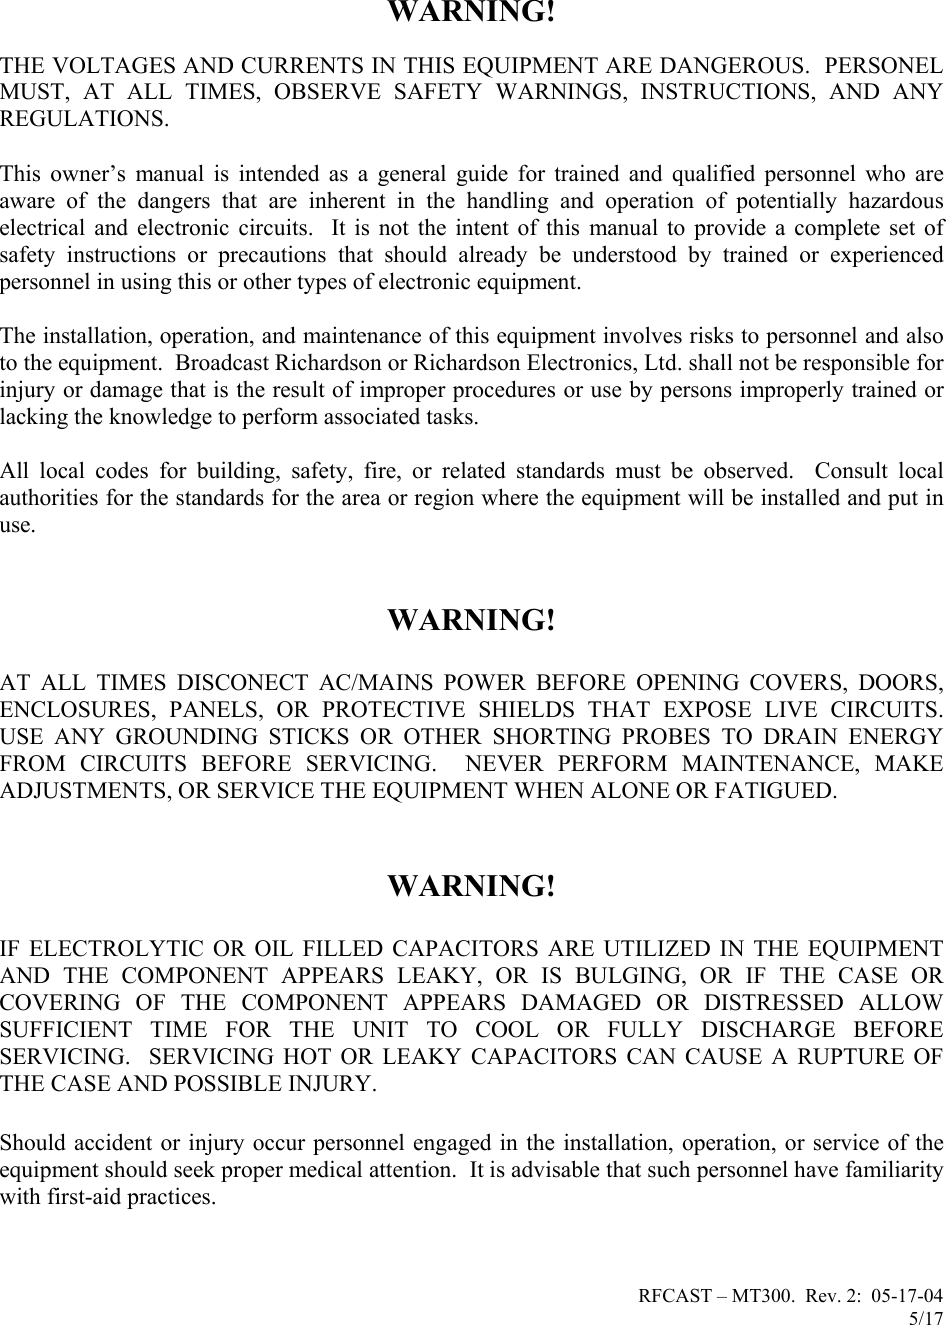 RFCAST – MT300.  Rev. 2:  05-17-04                       5/17                           WARNING!  THE VOLTAGES AND CURRENTS IN THIS EQUIPMENT ARE DANGEROUS.  PERSONEL MUST, AT ALL TIMES, OBSERVE SAFETY WARNINGS, INSTRUCTIONS, AND ANY REGULATIONS.  This owner’s manual is intended as a general guide for trained and qualified personnel who are aware of the dangers that are inherent in the handling and operation of potentially hazardous electrical and electronic circuits.  It is not the intent of this manual to provide a complete set of safety instructions or precautions that should already be understood by trained or experienced personnel in using this or other types of electronic equipment.   The installation, operation, and maintenance of this equipment involves risks to personnel and also to the equipment.  Broadcast Richardson or Richardson Electronics, Ltd. shall not be responsible for injury or damage that is the result of improper procedures or use by persons improperly trained or lacking the knowledge to perform associated tasks.  All local codes for building, safety, fire, or related standards must be observed.  Consult local authorities for the standards for the area or region where the equipment will be installed and put in use.     WARNING!  AT ALL TIMES DISCONECT AC/MAINS POWER BEFORE OPENING COVERS, DOORS, ENCLOSURES, PANELS, OR PROTECTIVE SHIELDS THAT EXPOSE LIVE CIRCUITS.  USE ANY GROUNDING STICKS OR OTHER SHORTING PROBES TO DRAIN ENERGY FROM CIRCUITS BEFORE SERVICING.  NEVER PERFORM MAINTENANCE, MAKE ADJUSTMENTS, OR SERVICE THE EQUIPMENT WHEN ALONE OR FATIGUED.   WARNING!  IF ELECTROLYTIC OR OIL FILLED CAPACITORS ARE UTILIZED IN THE EQUIPMENT AND THE COMPONENT APPEARS LEAKY, OR IS BULGING, OR IF THE CASE OR COVERING OF THE COMPONENT APPEARS DAMAGED OR DISTRESSED ALLOW SUFFICIENT TIME FOR THE UNIT TO COOL OR FULLY DISCHARGE BEFORE SERVICING.  SERVICING HOT OR LEAKY CAPACITORS CAN CAUSE A RUPTURE OF THE CASE AND POSSIBLE INJURY.  Should accident or injury occur personnel engaged in the installation, operation, or service of the equipment should seek proper medical attention.  It is advisable that such personnel have familiarity with first-aid practices.      